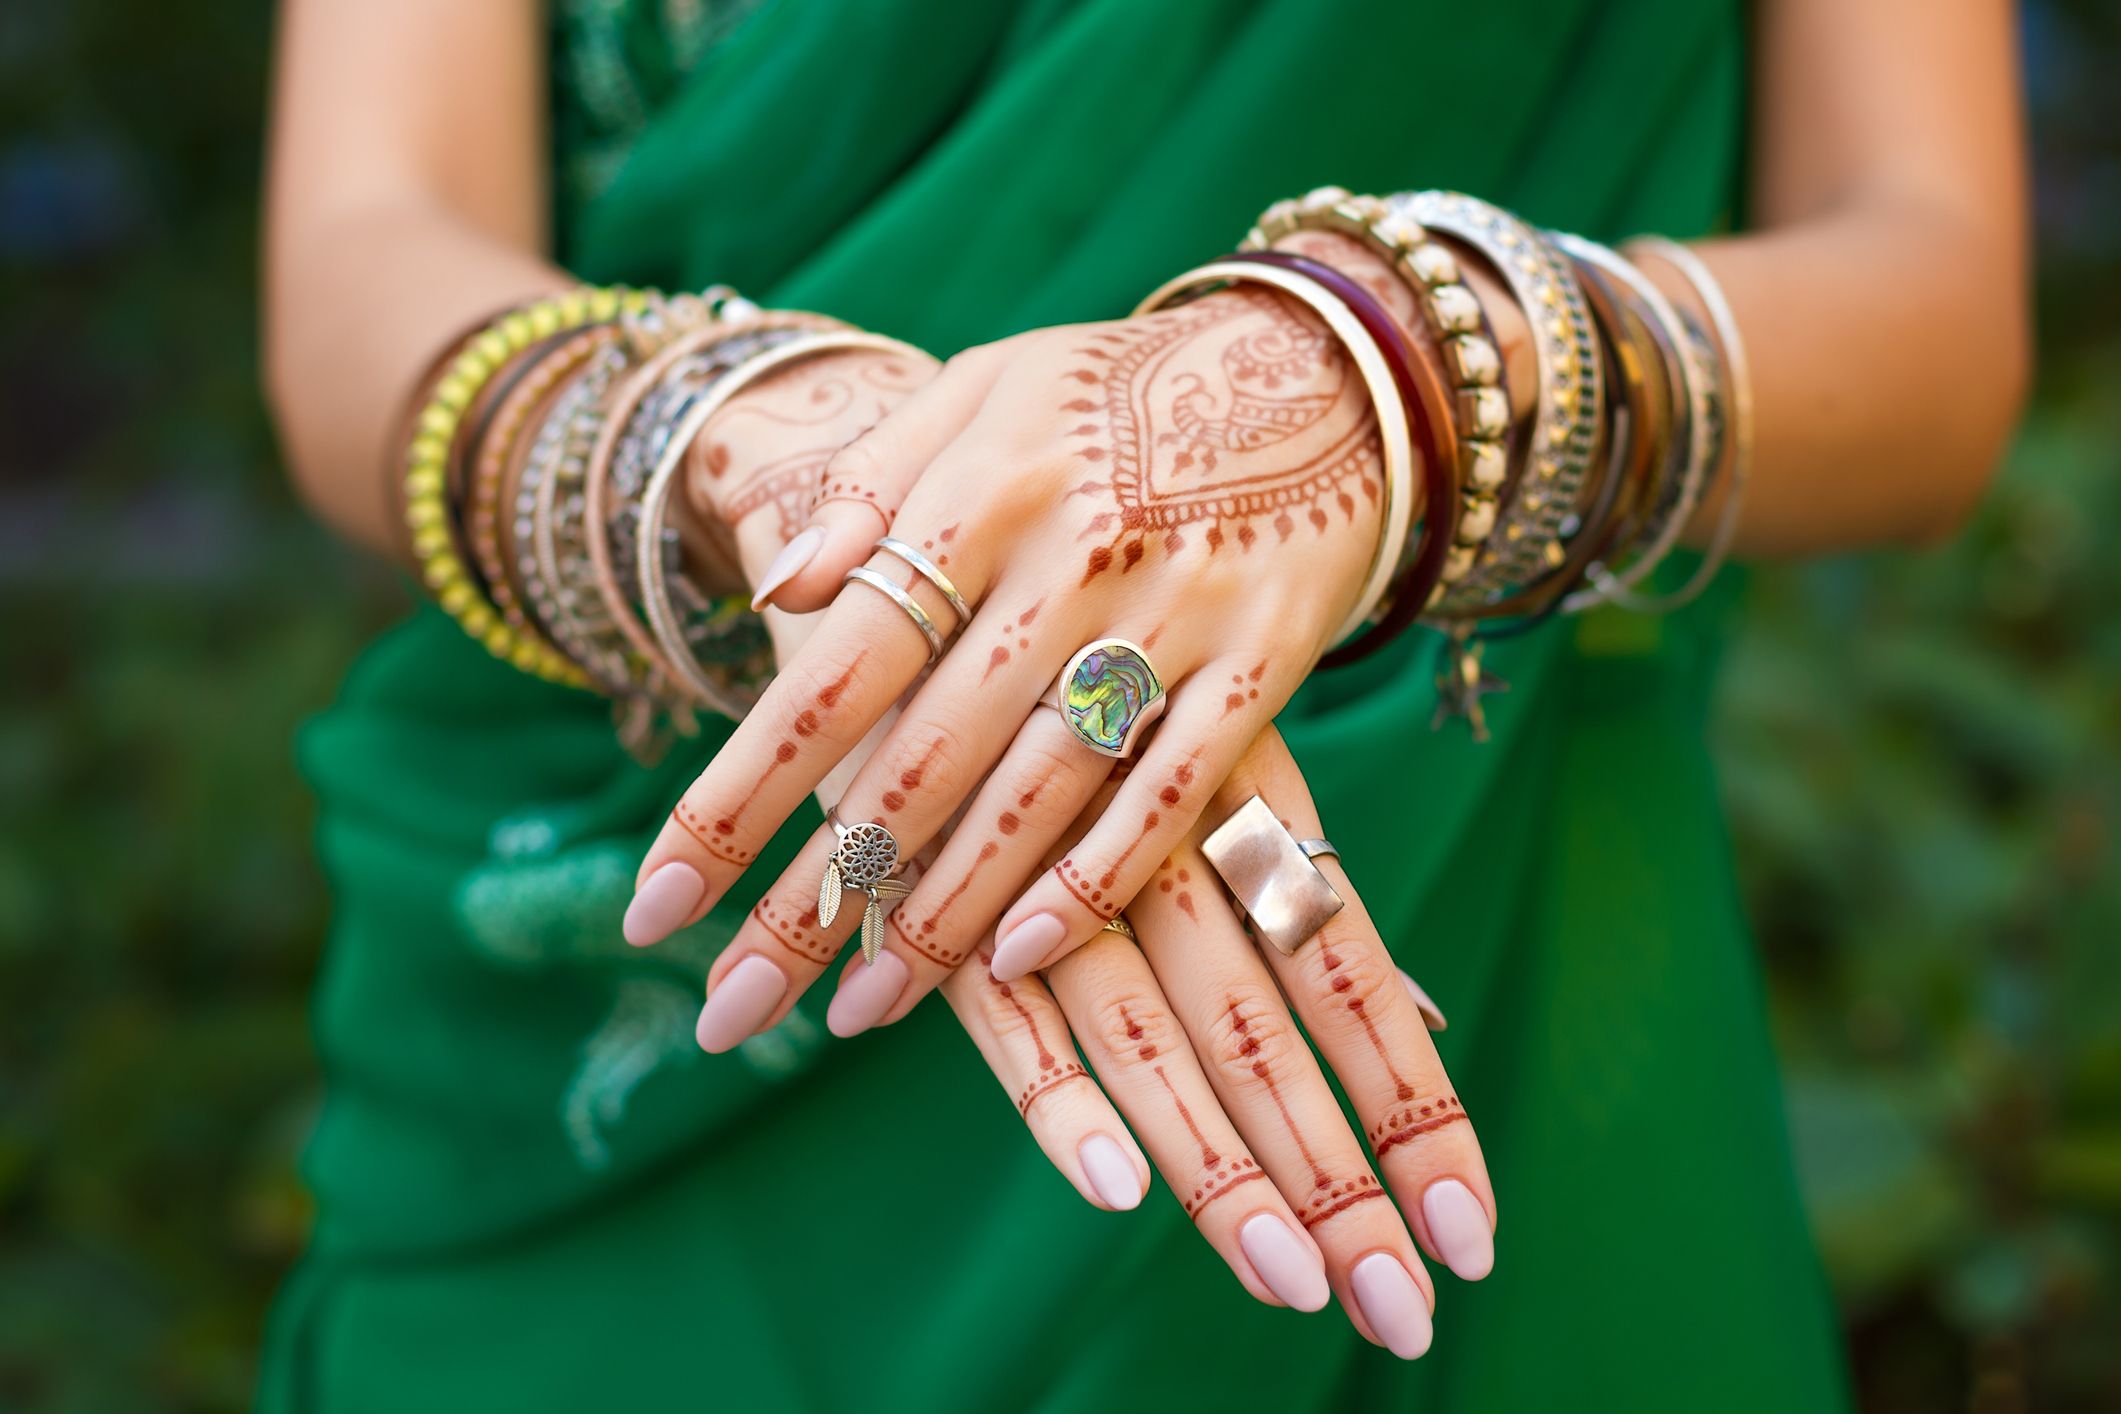 How to Care for a Henna Design: Aftercare Instructions